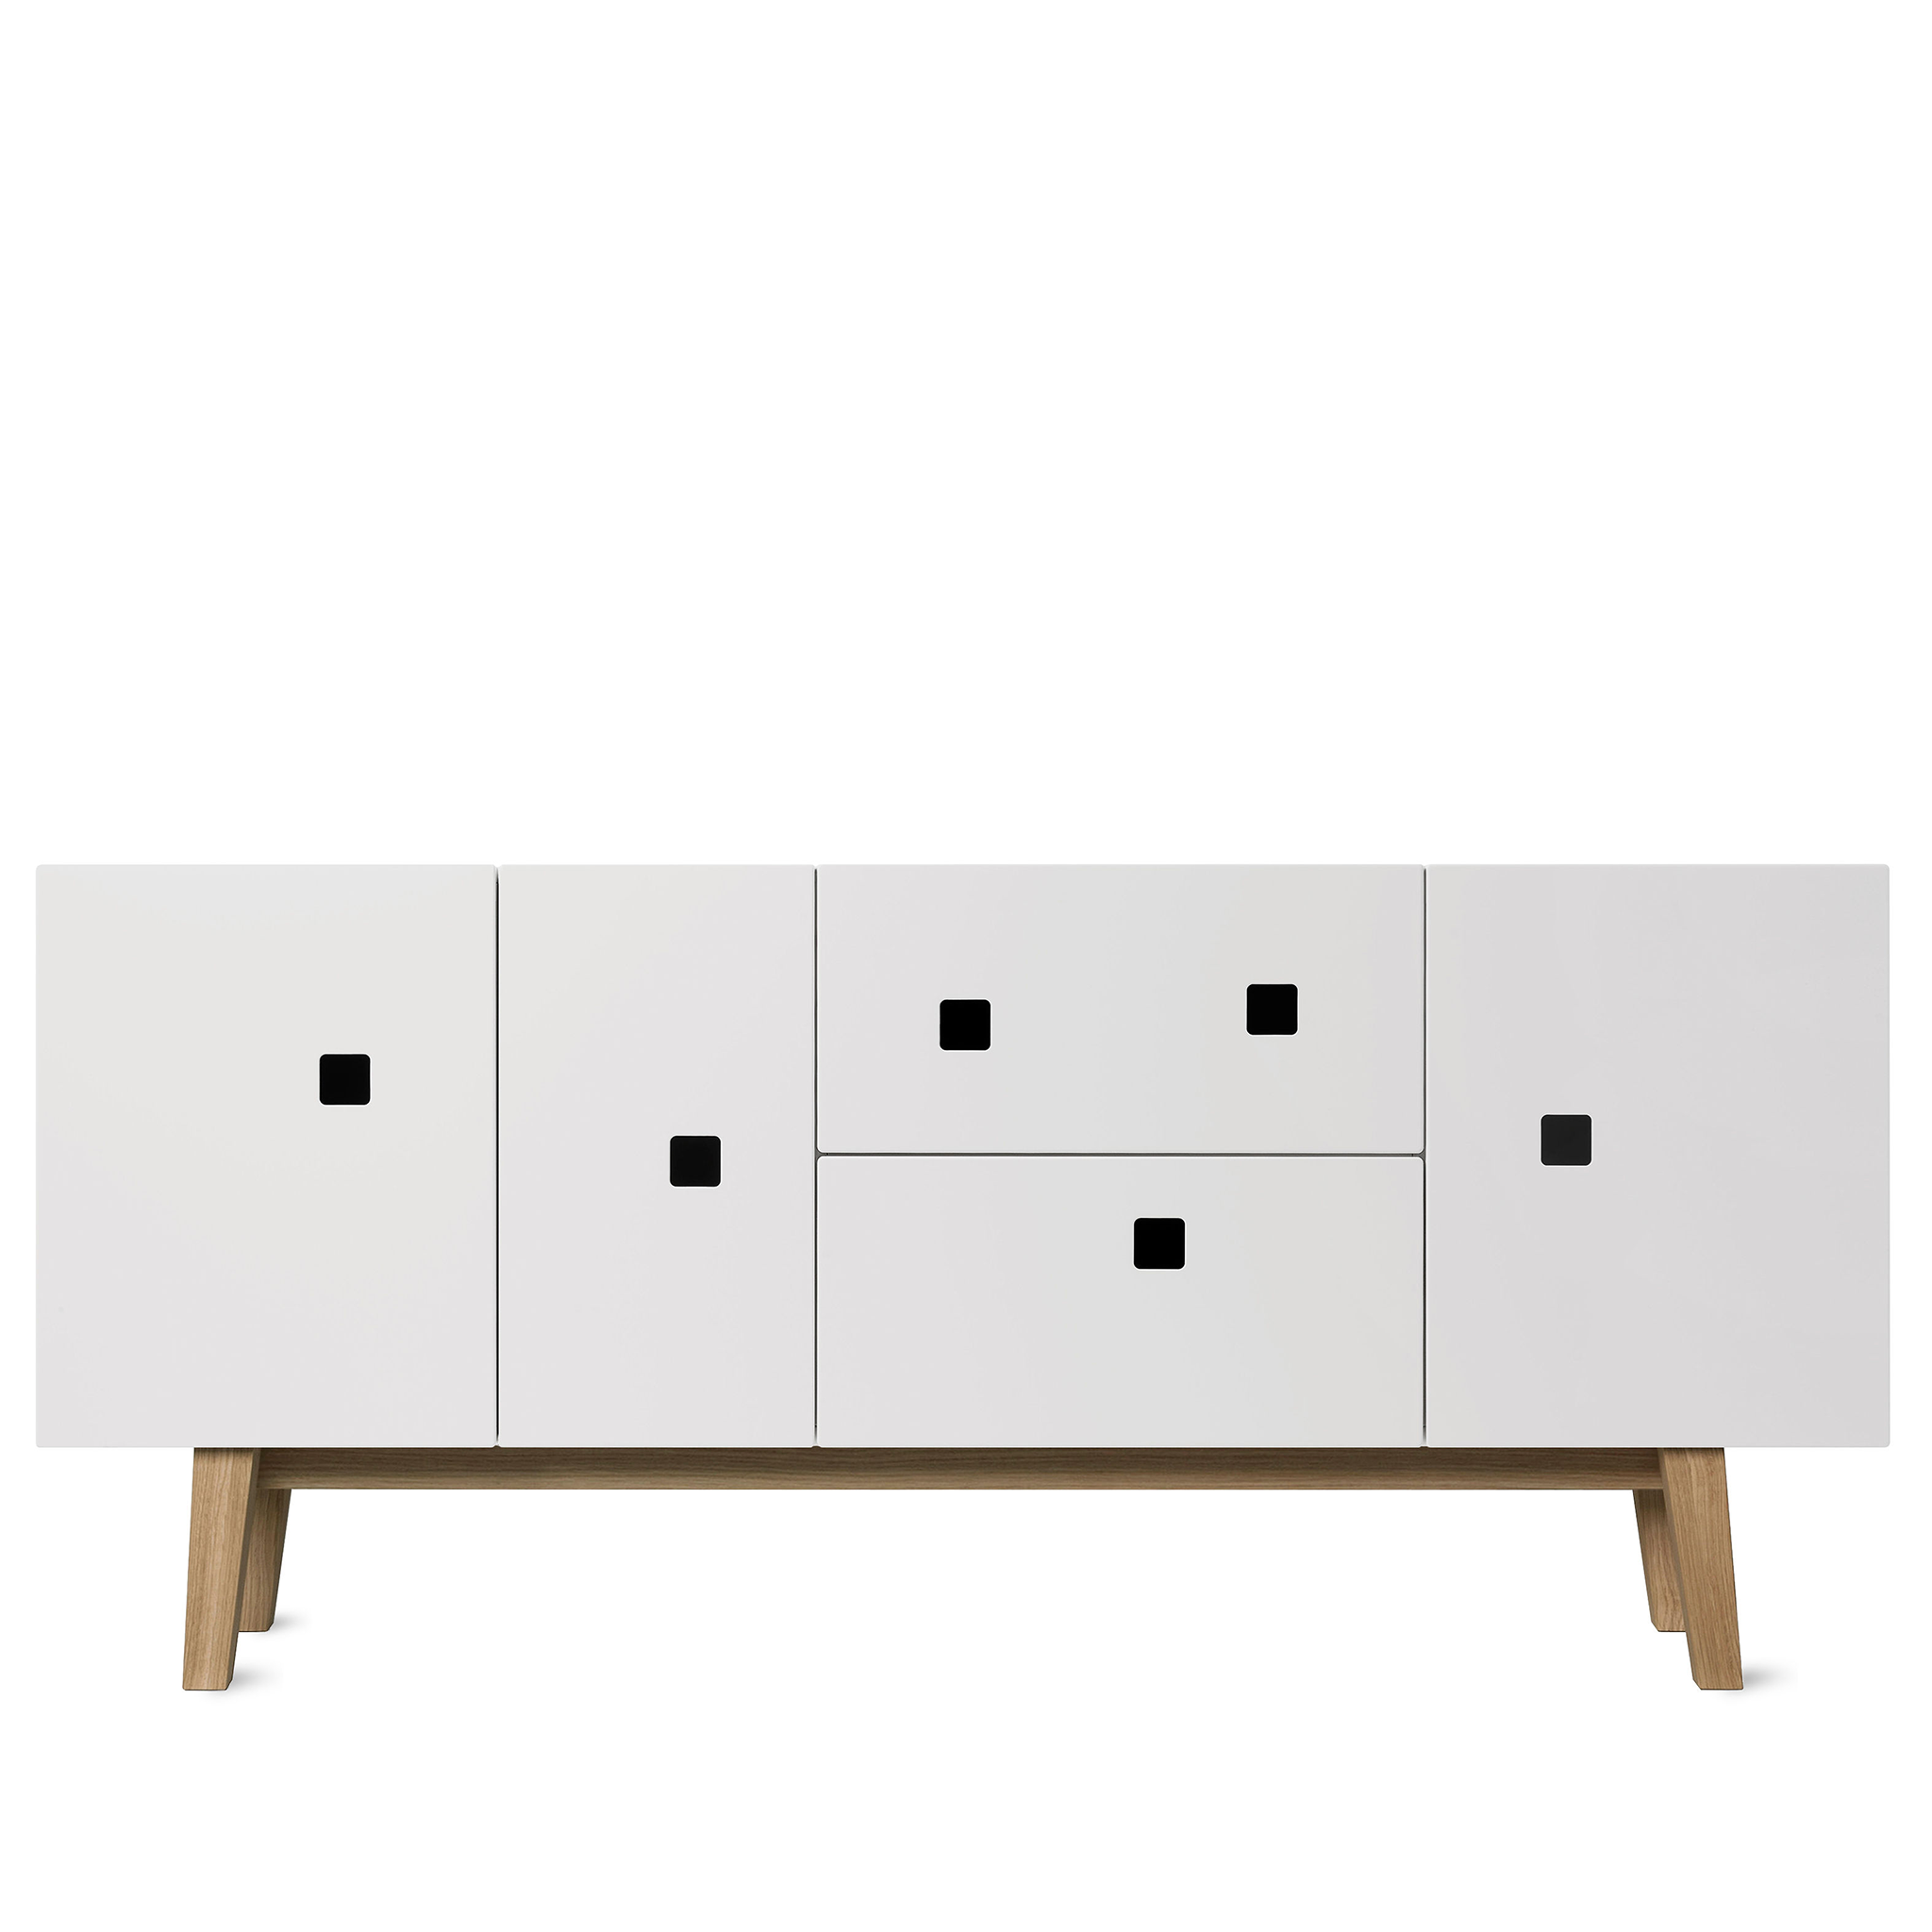 Peep M2 Media Cabinet by Zweed